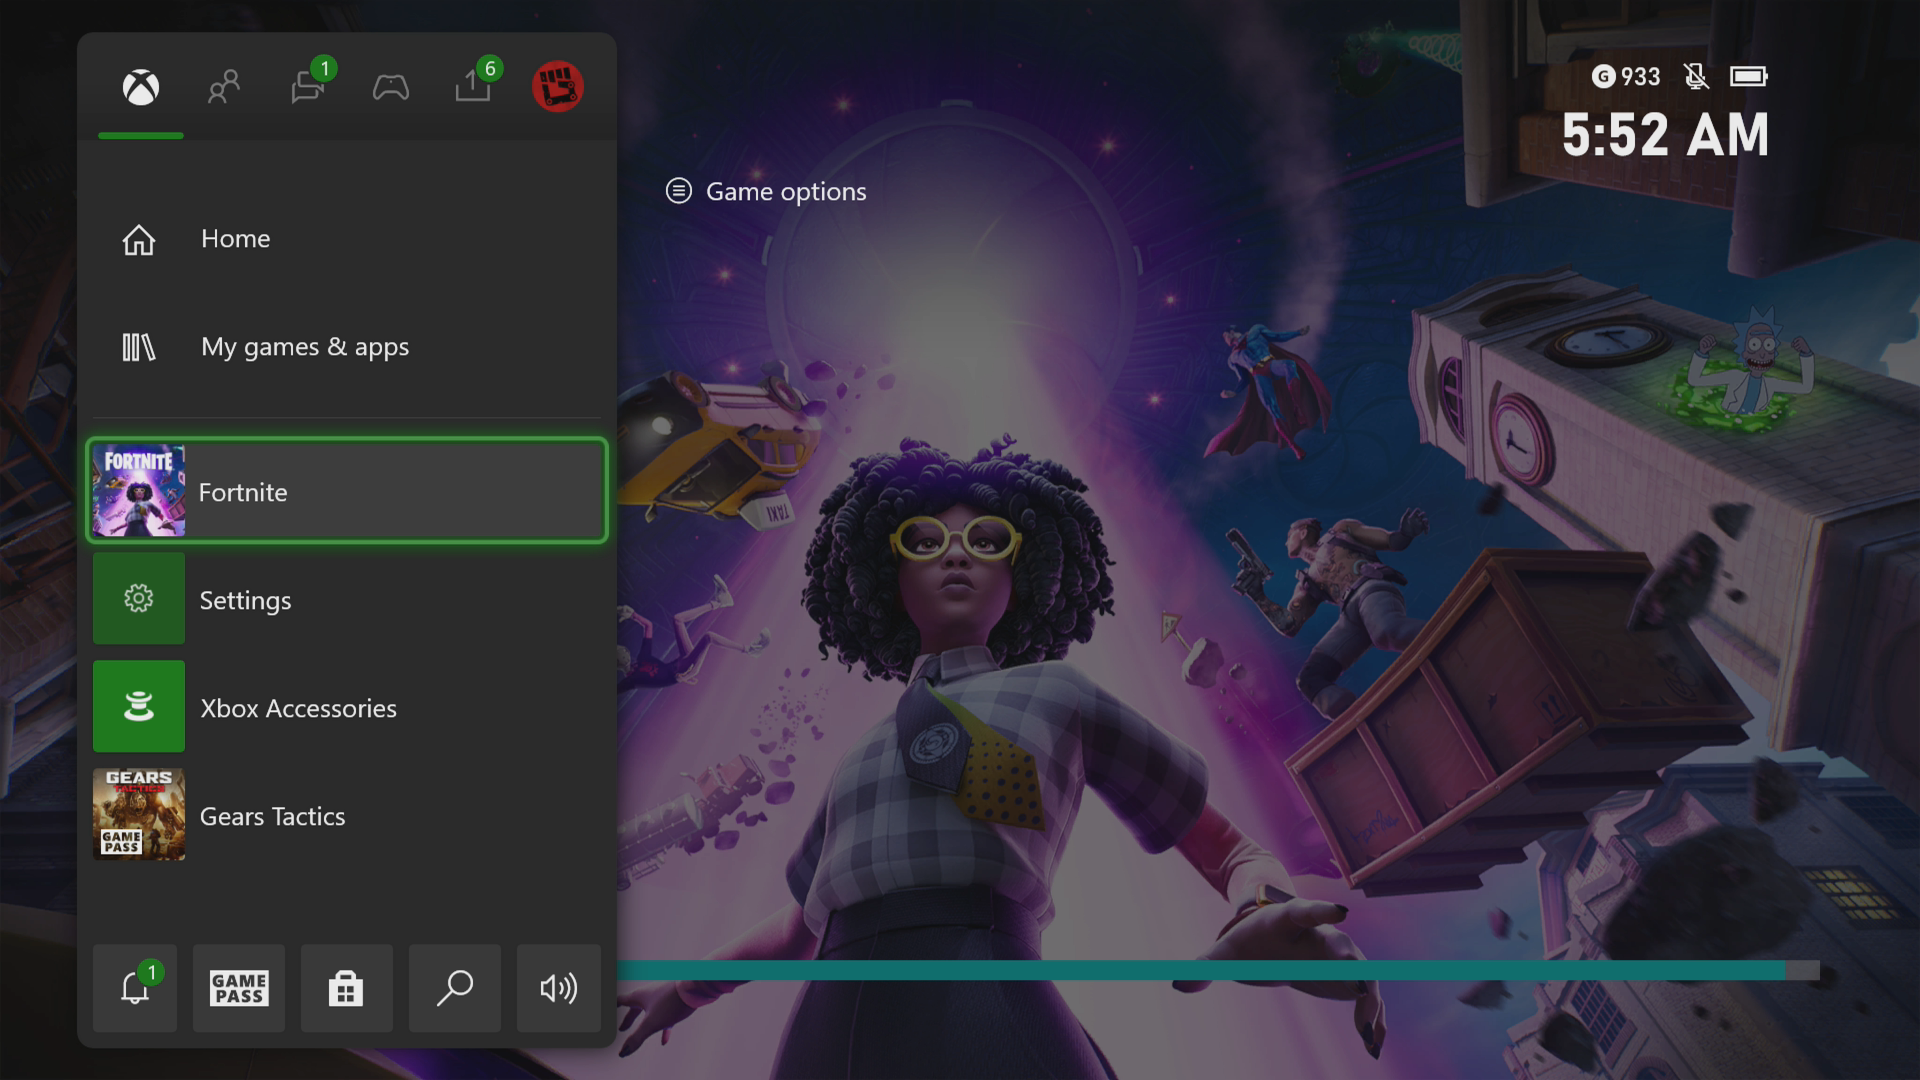 What to do when Fortnite  keeps crashing or freezing on your Xbox Series X